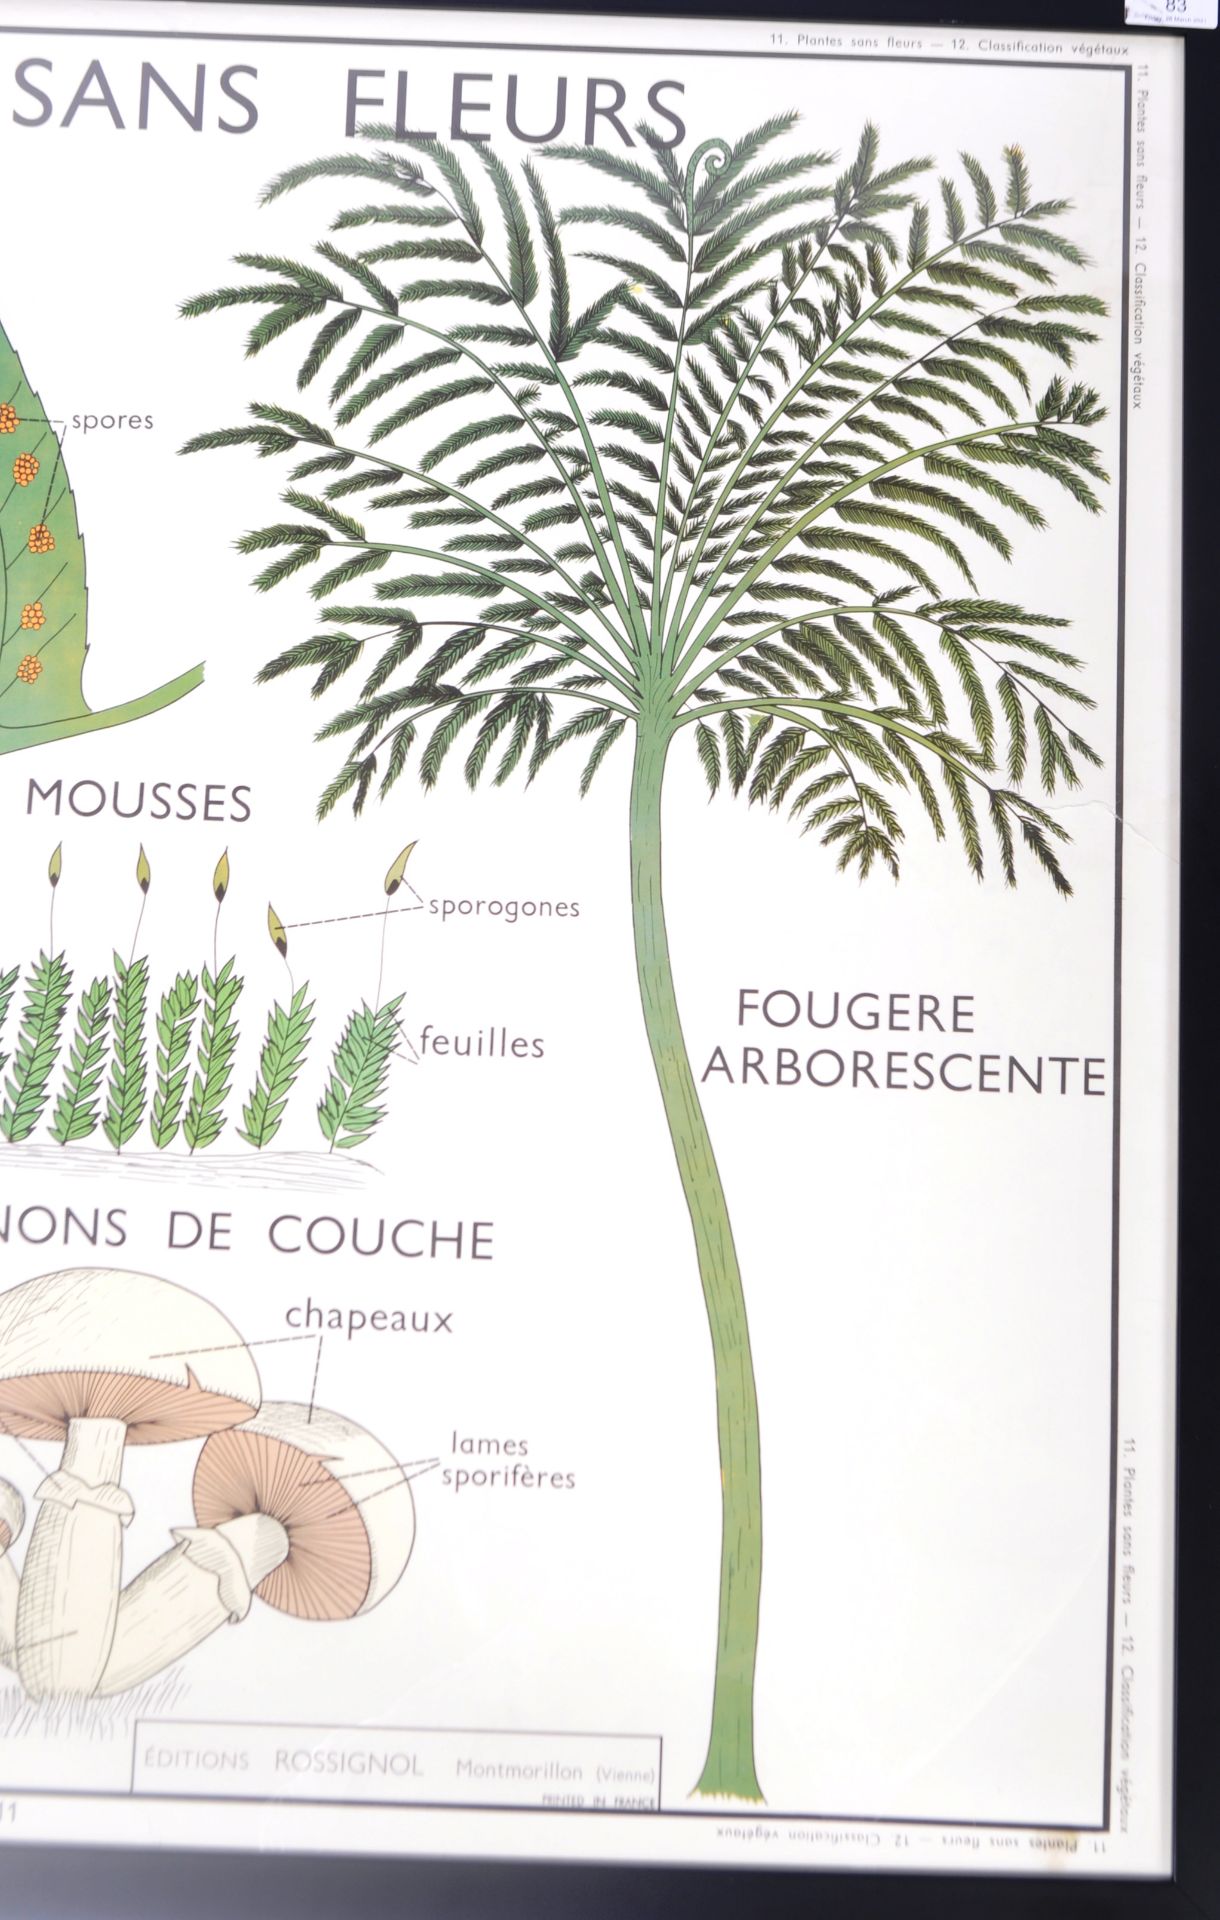 VINTAGE FRENCH FLOWERLESS PLANTS SCHOOL POSTER - Image 2 of 4